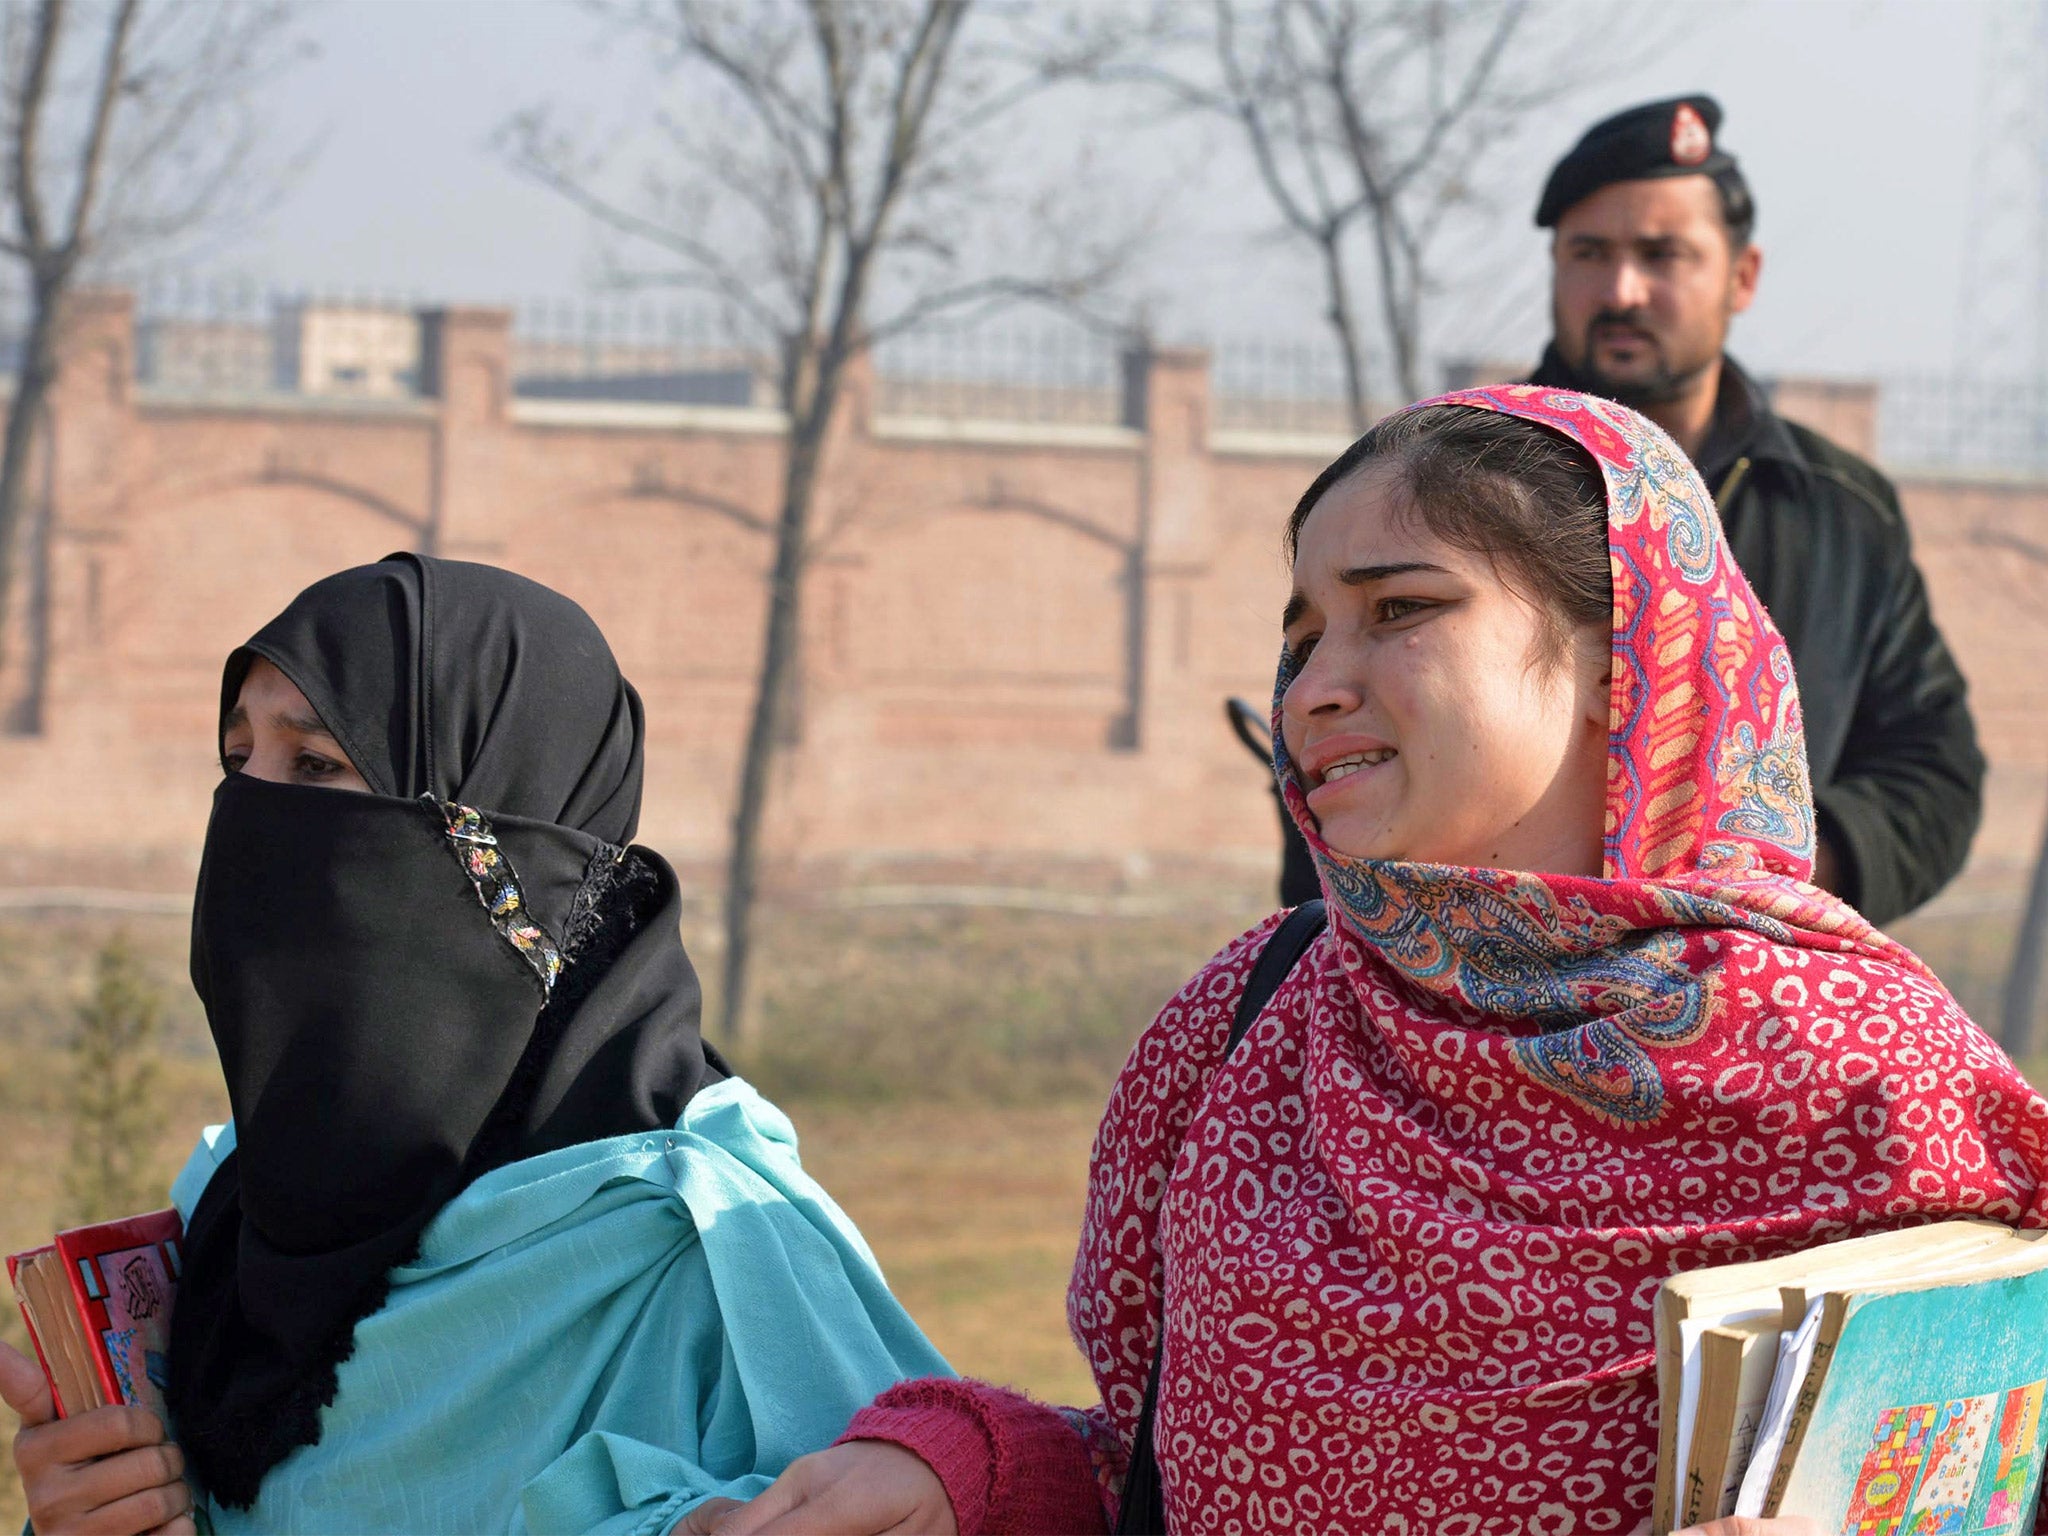 Student of Bacha Khan university react after the attack (Getty)